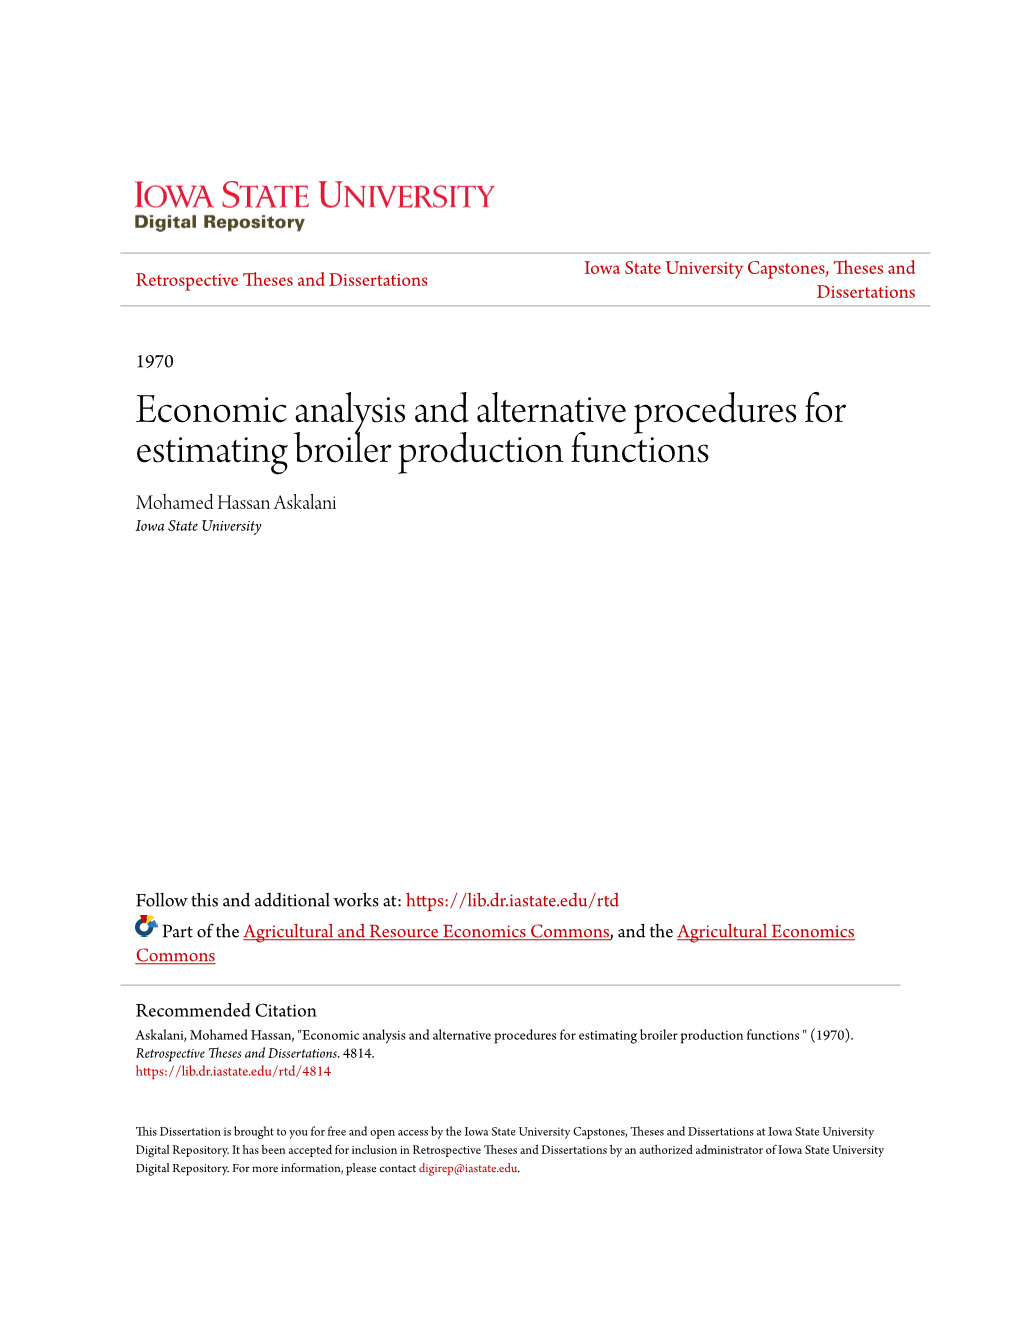 Economic Analysis and Alternative Procedures for Estimating Broiler Production Functions Mohamed Hassan Askalani Iowa State University